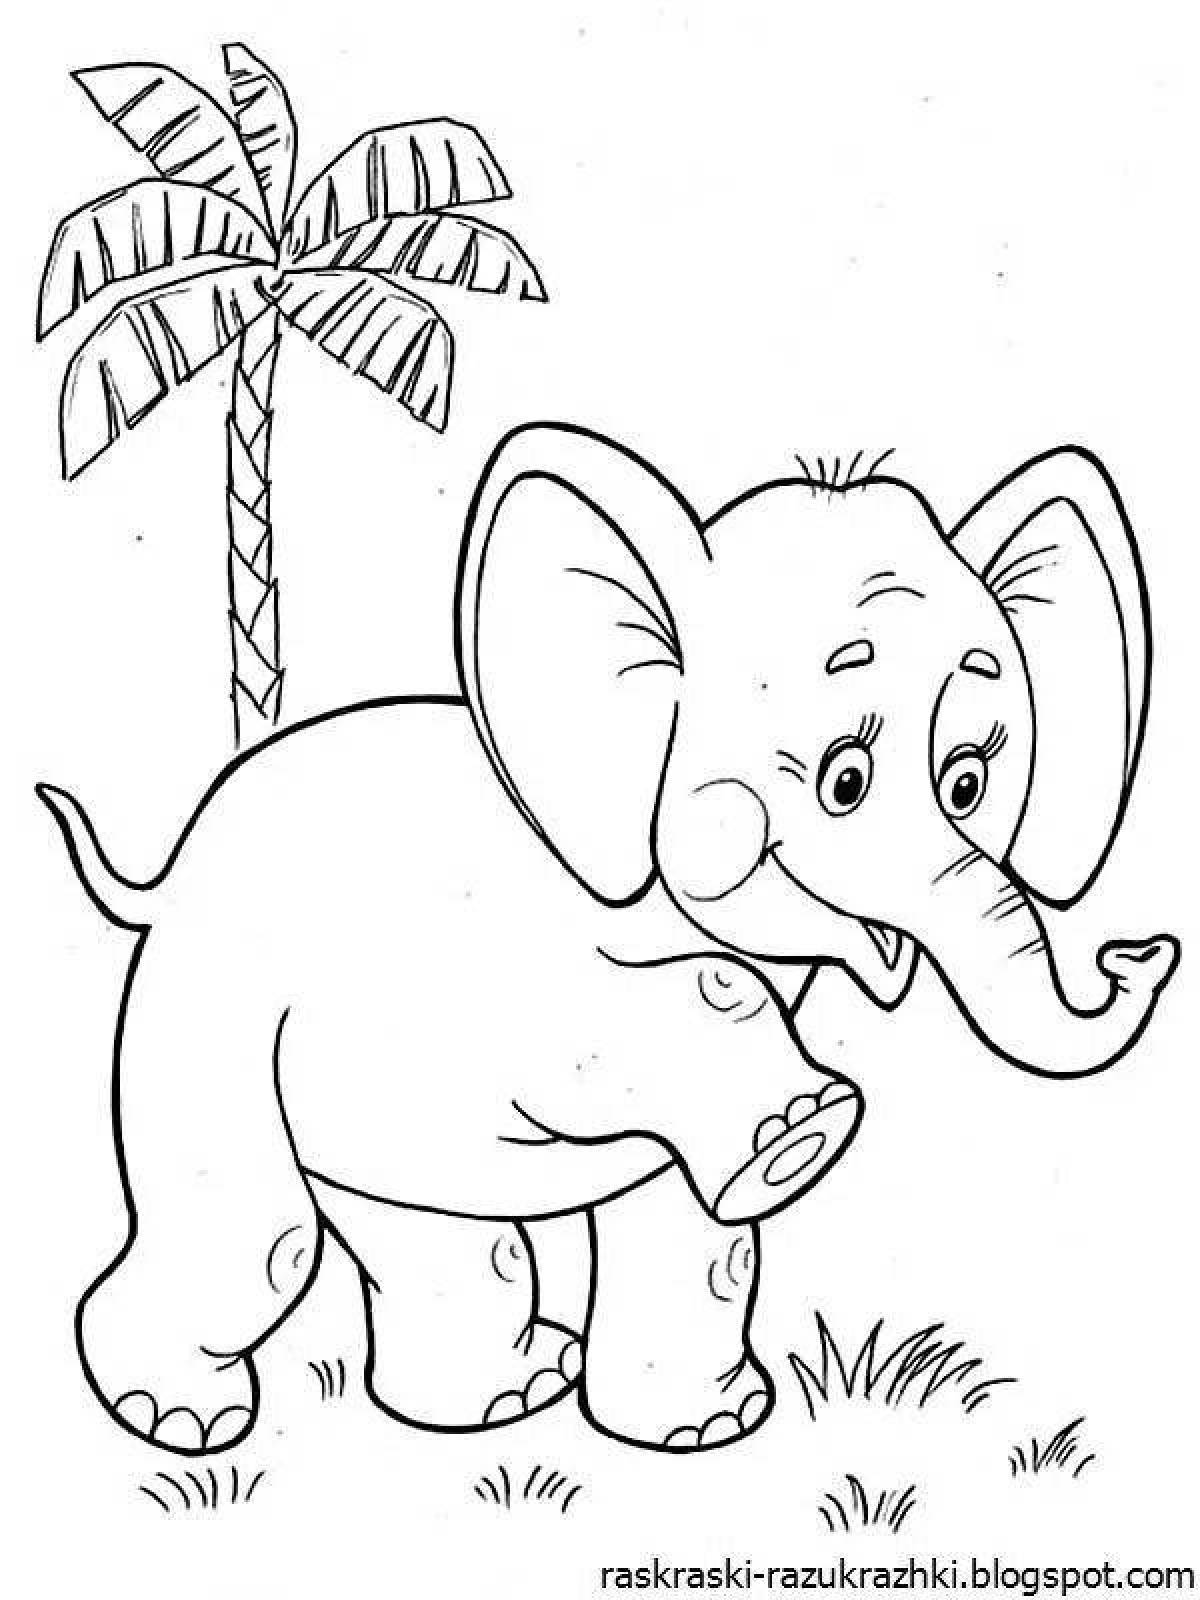 Coloring pages for children with animals from hot countries